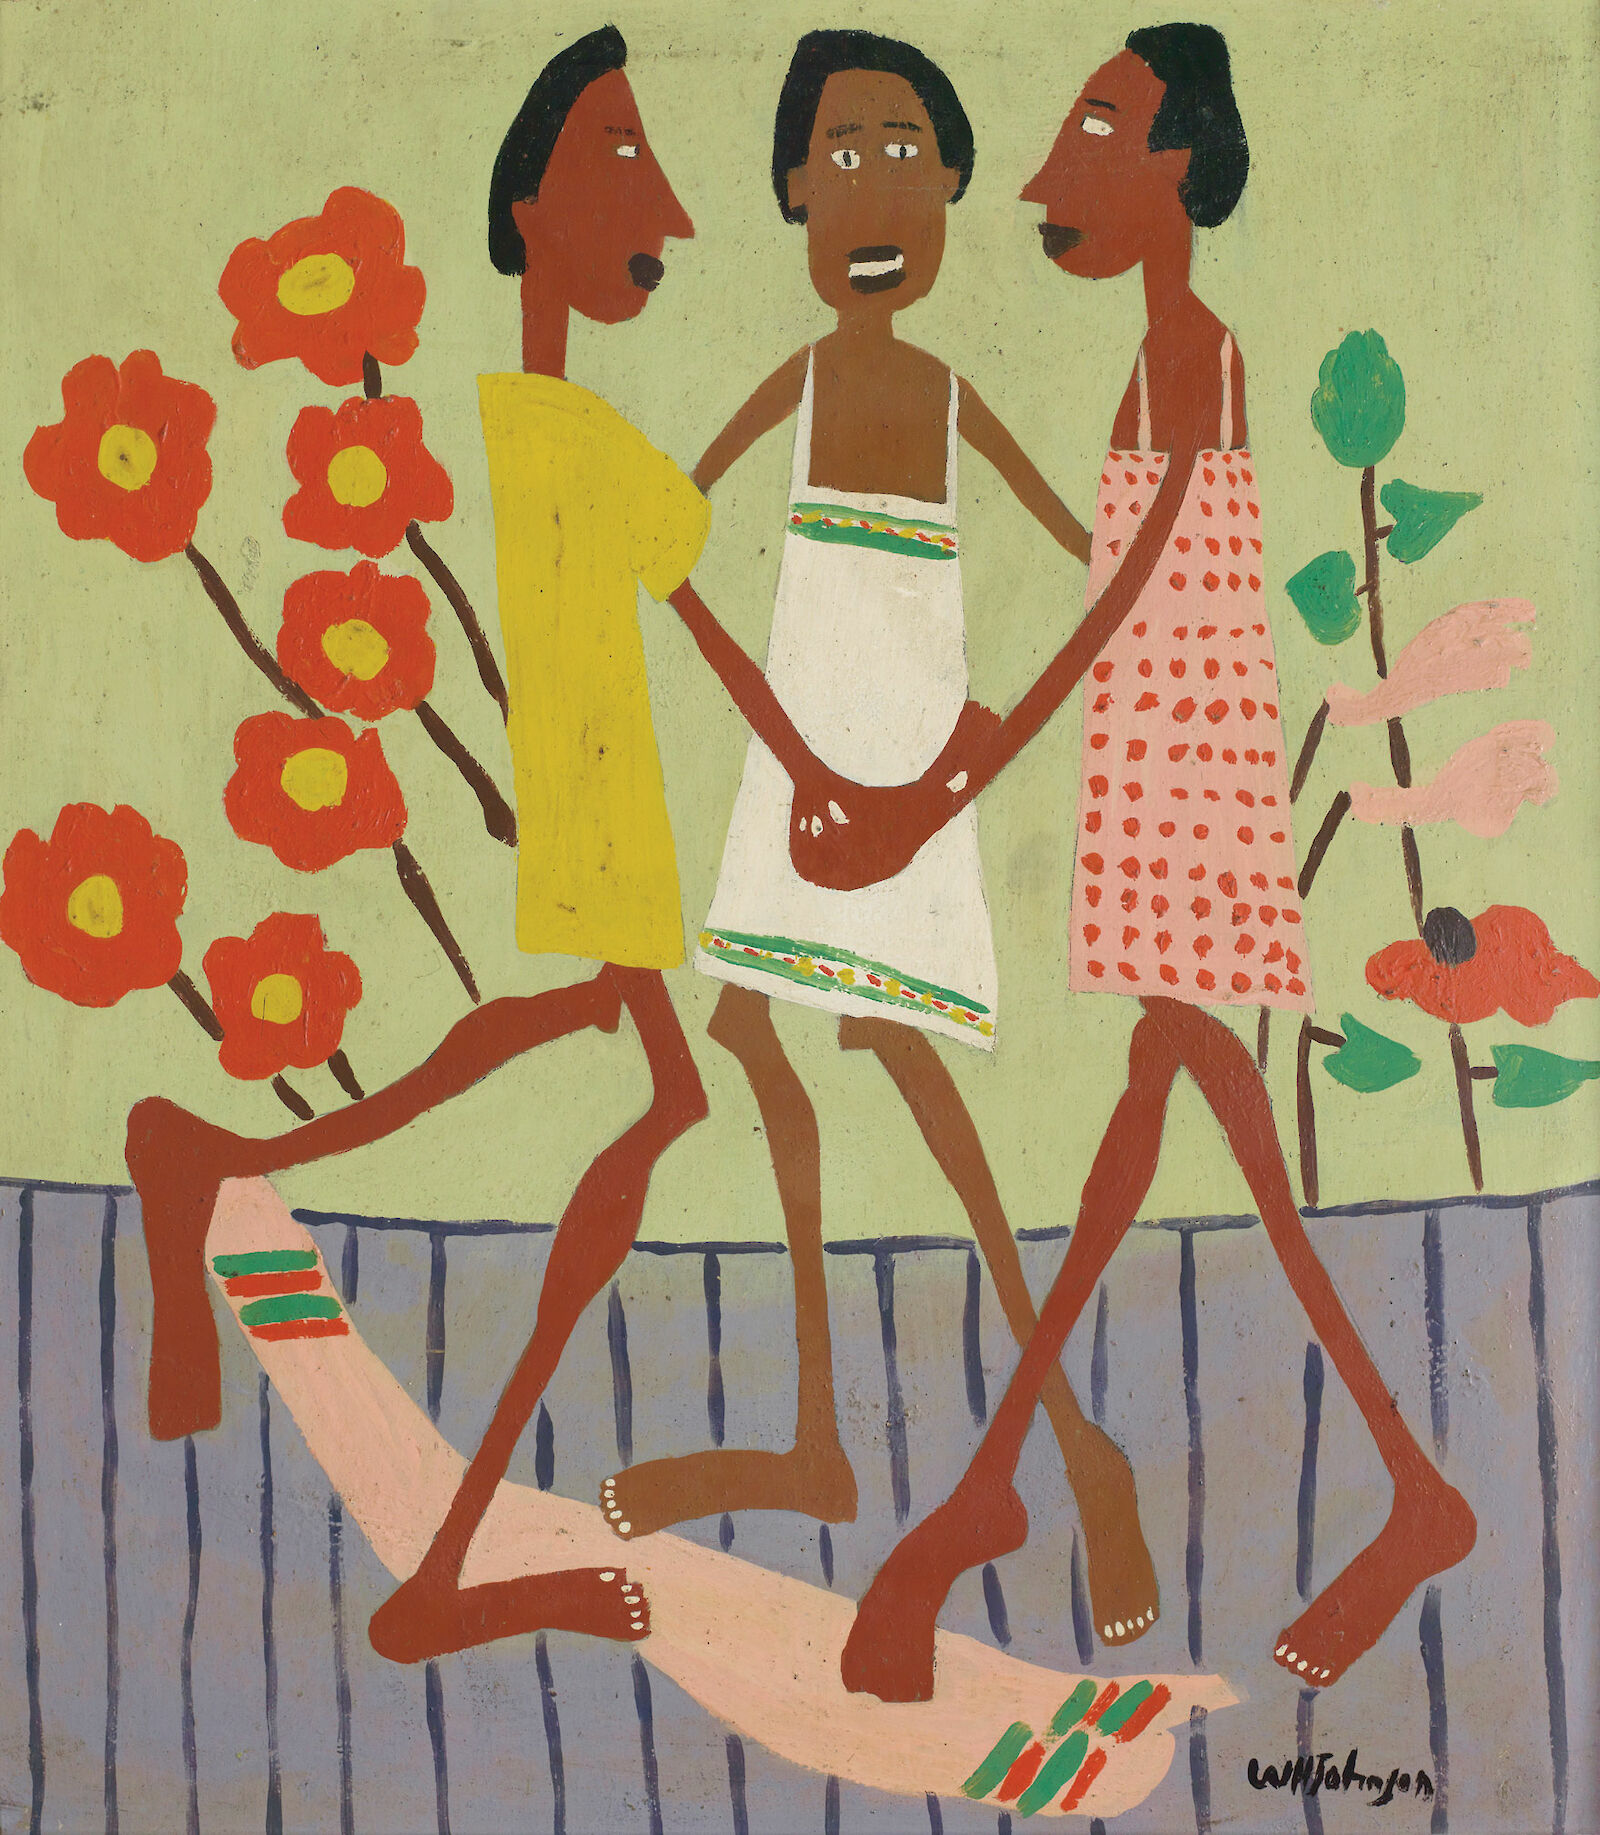 Ring Around the Rosey by William H. Johnson | Obelisk Art History